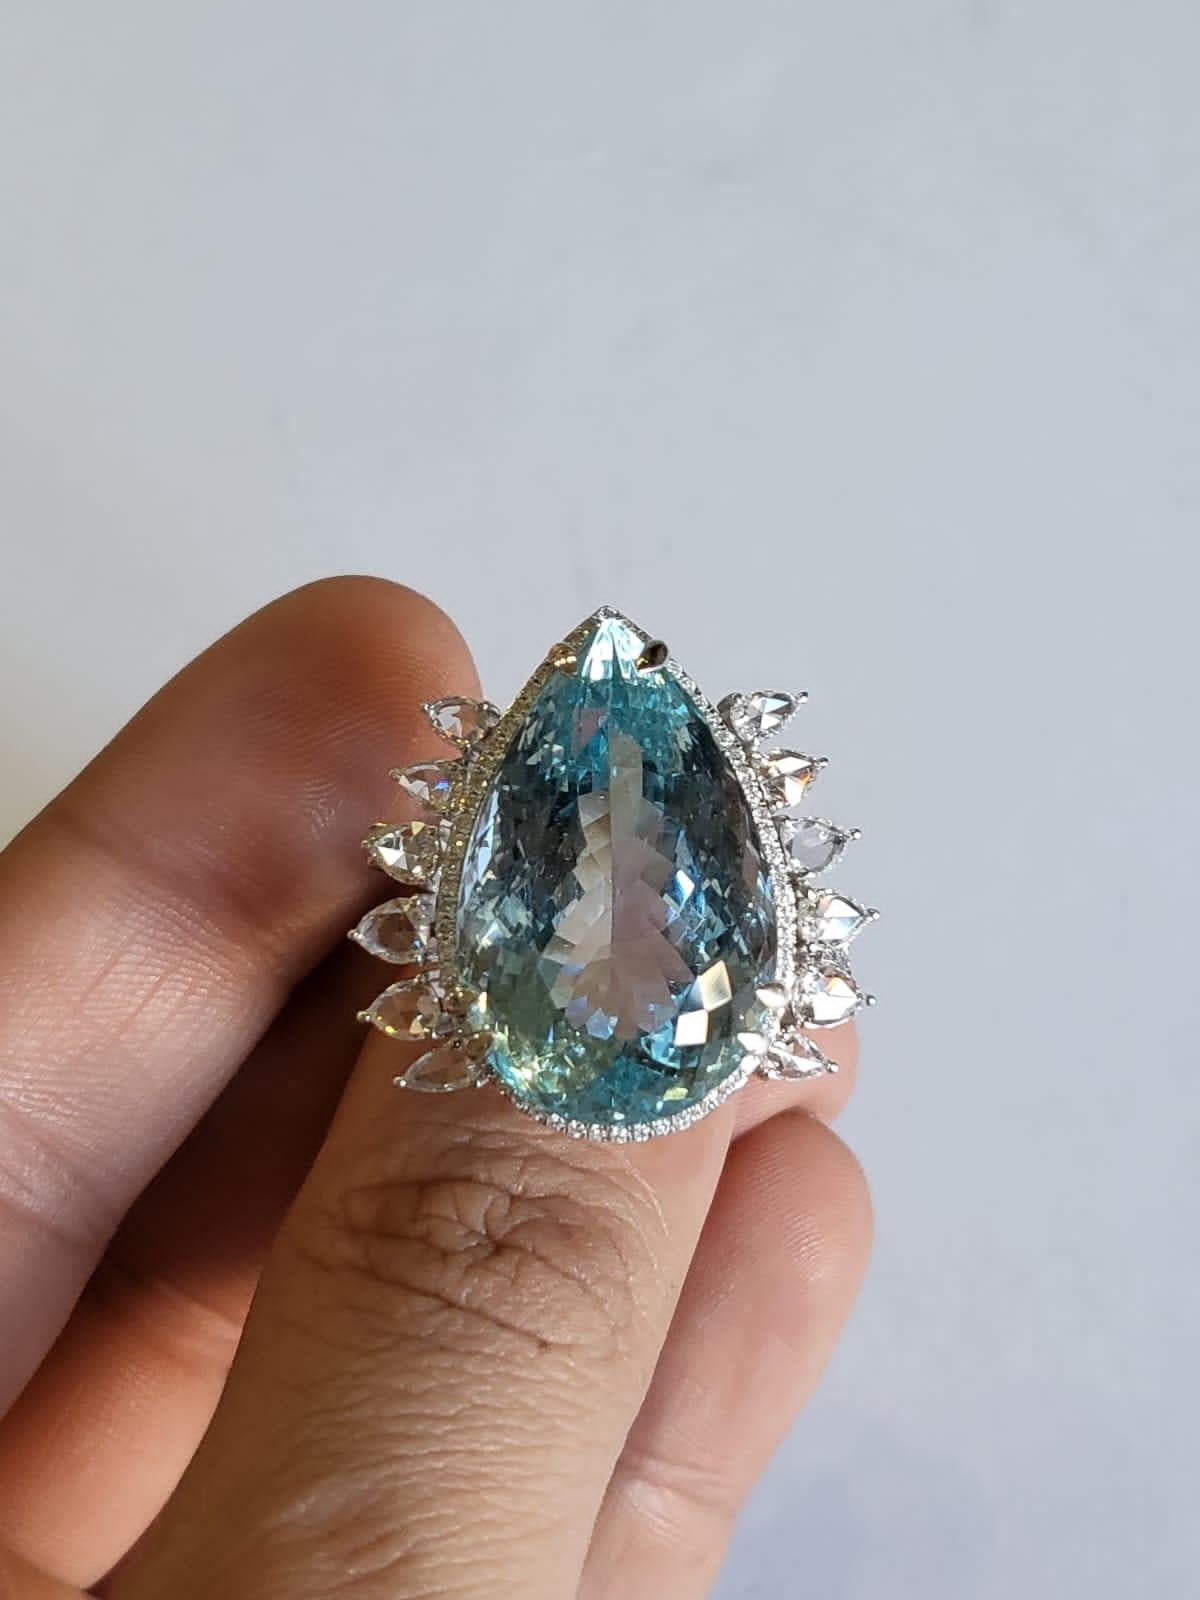 A very beautiful and one of a kind, Aquamarine Cocktail Ring set in 18K White Gold. The weight of the Aquamarine is 26.69 carats. The combined weight of the Diamonds 1.45 carats. Net Gold weight is 8.46 grams. The dimensions of the ring are 2.80cm x